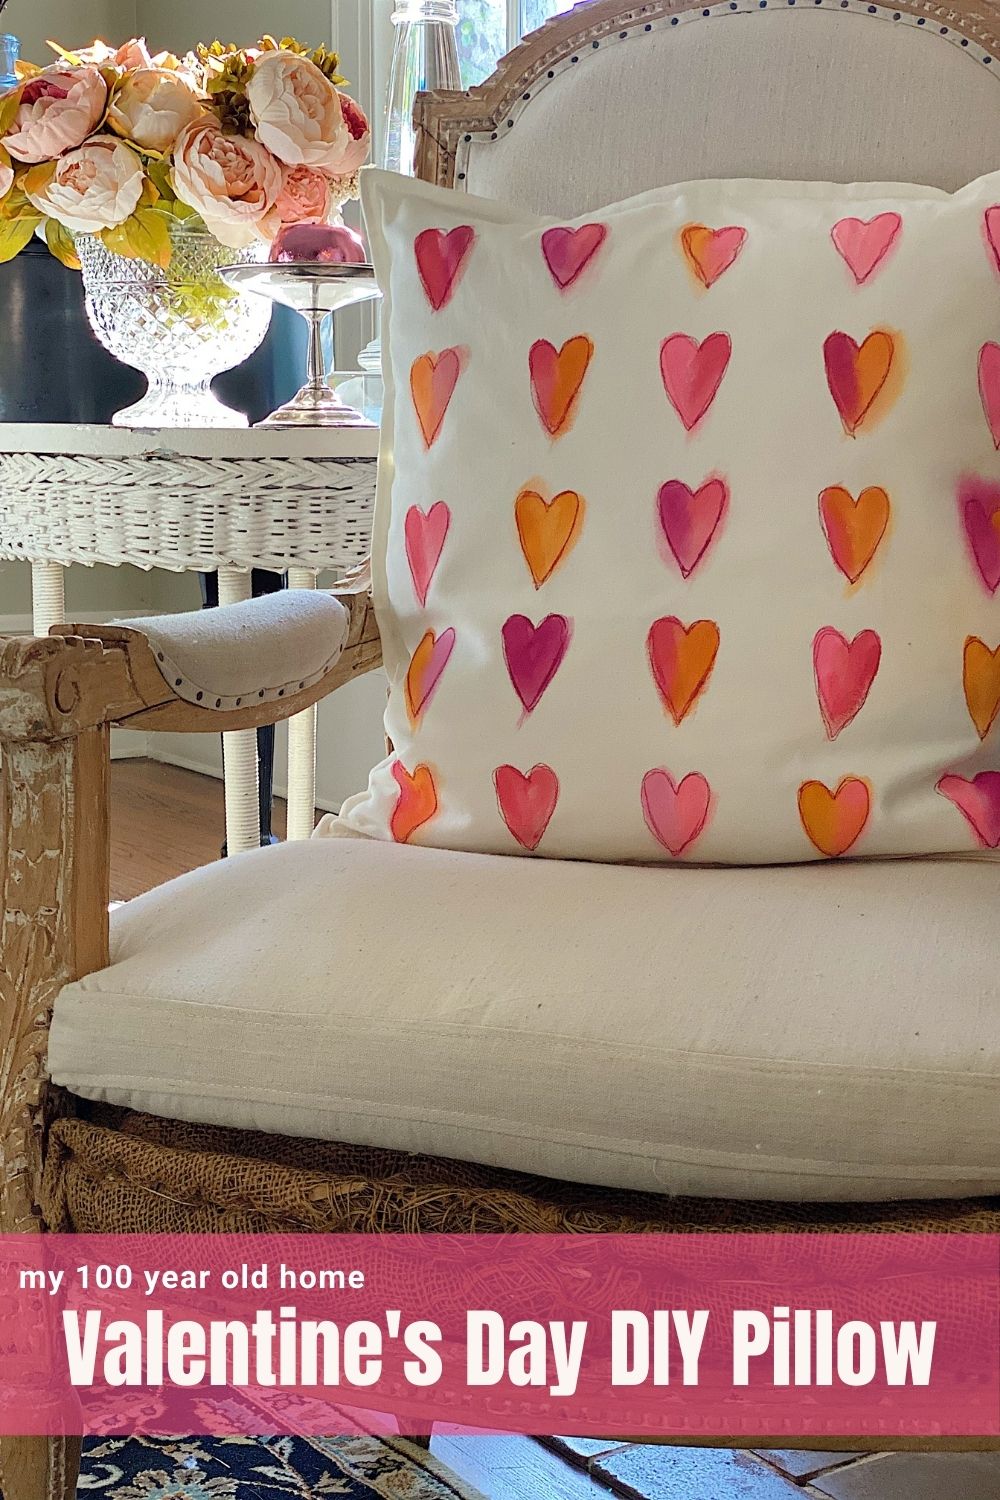 I have always known that I would be making a heart pillow for this year's Valentine's Day Decor. I love this one!